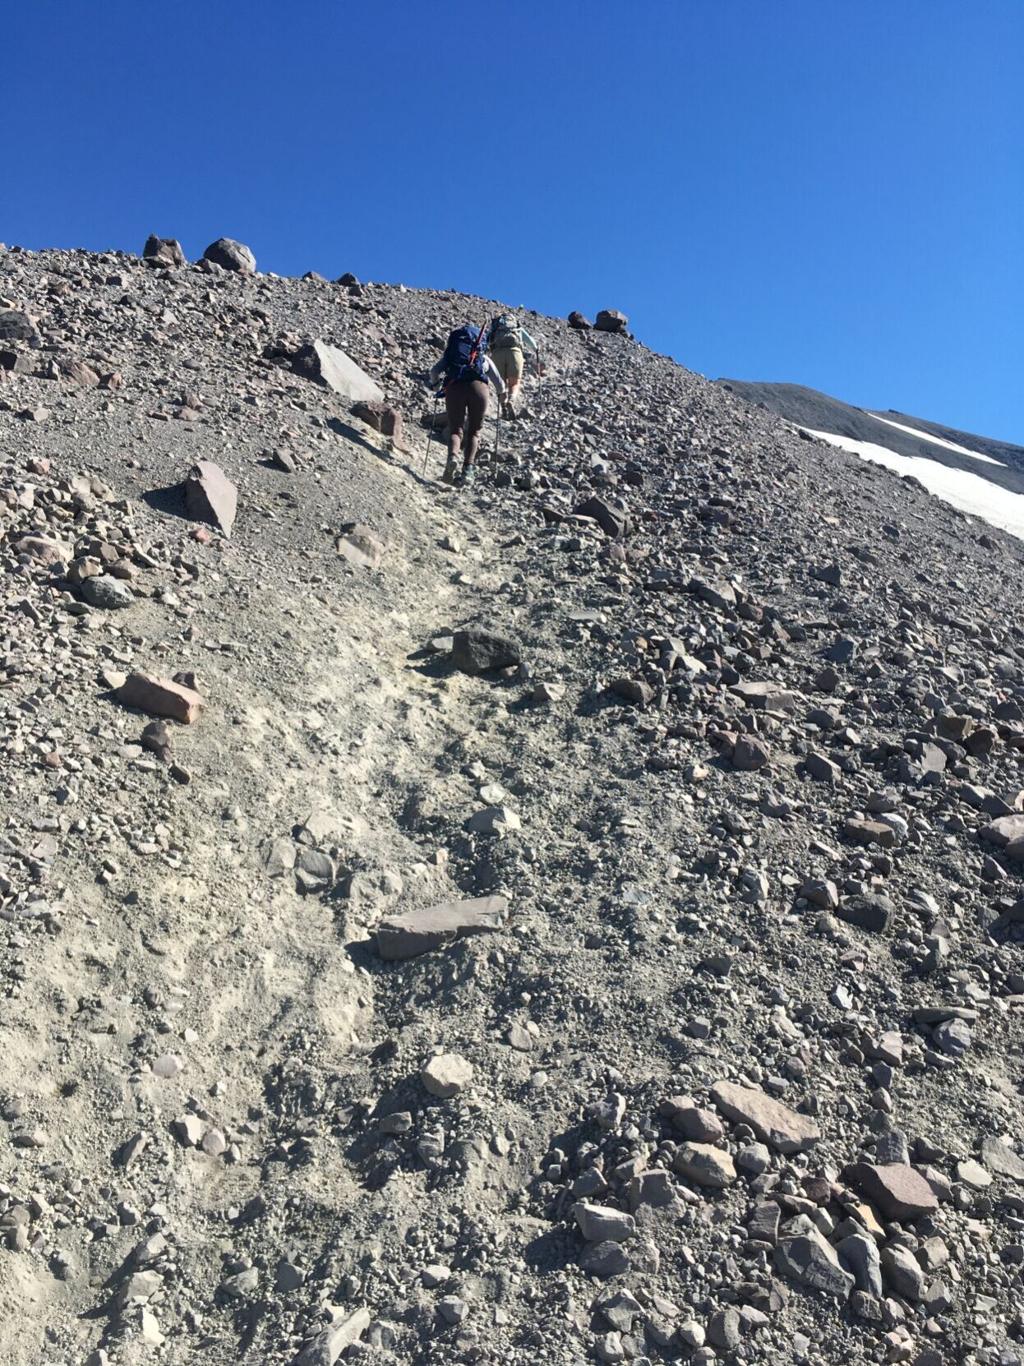 Climbing Mount Adams took me to heights I wasn't sure I'd ever reach, Magazine